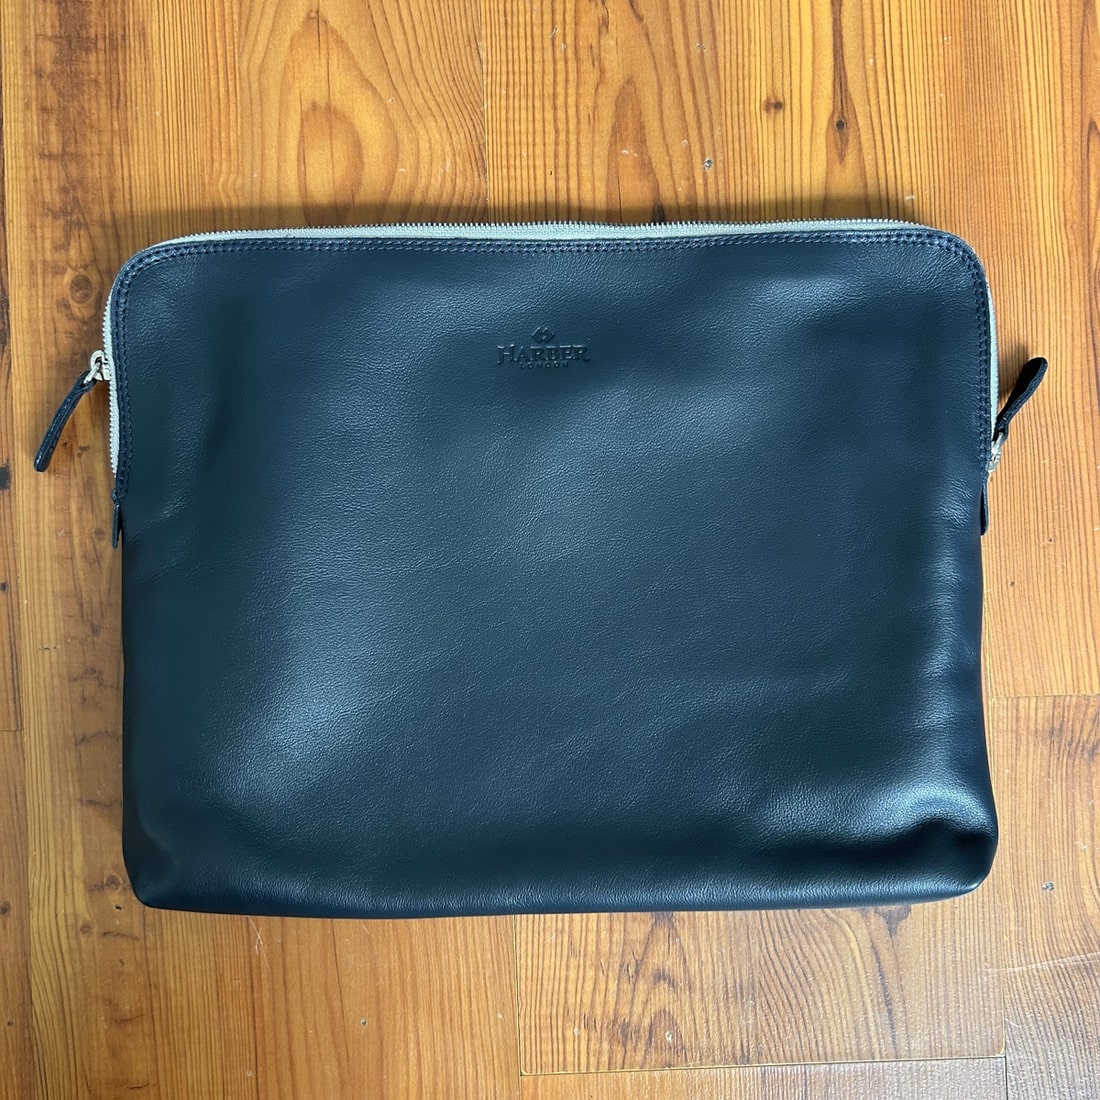 Bright Ideas - New Arrival!! Fit and Fresh Padded laptop sleeve protects  your laptop, notebook or tablet against bumps, knocks and daily wear and  tear. Its' Sleek design offers plenty of protection